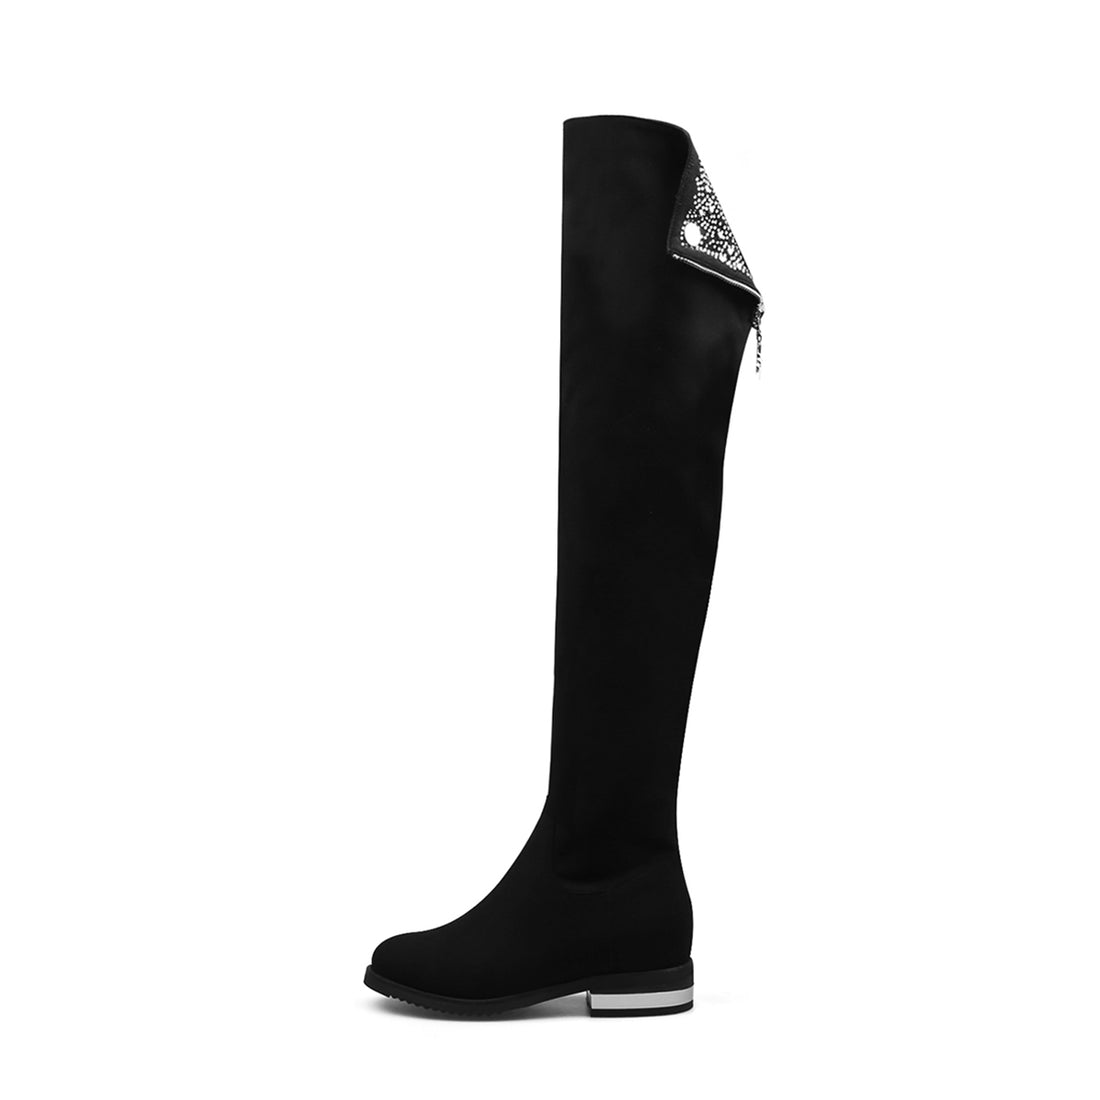 Urban Metal Contrasted Silver Knee-high Boots